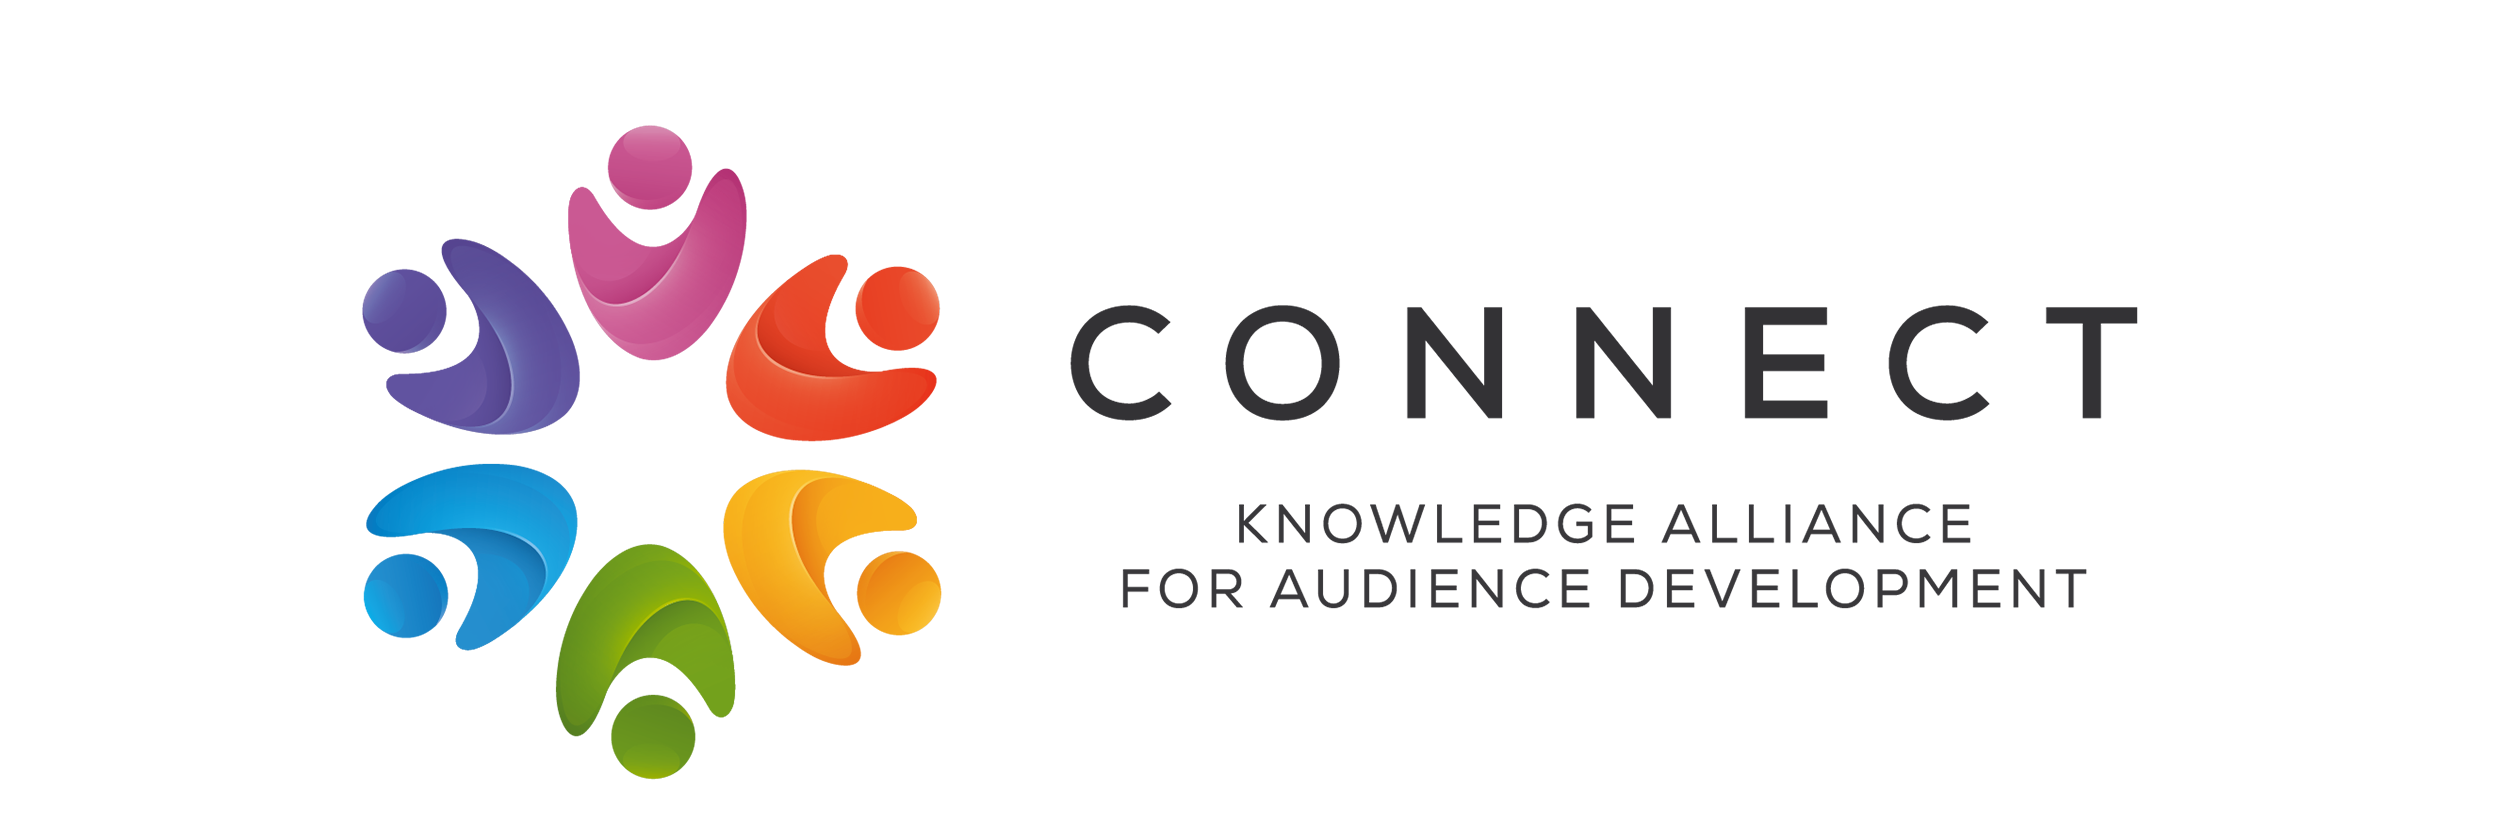 CONNECT knowledge alliance for audience development